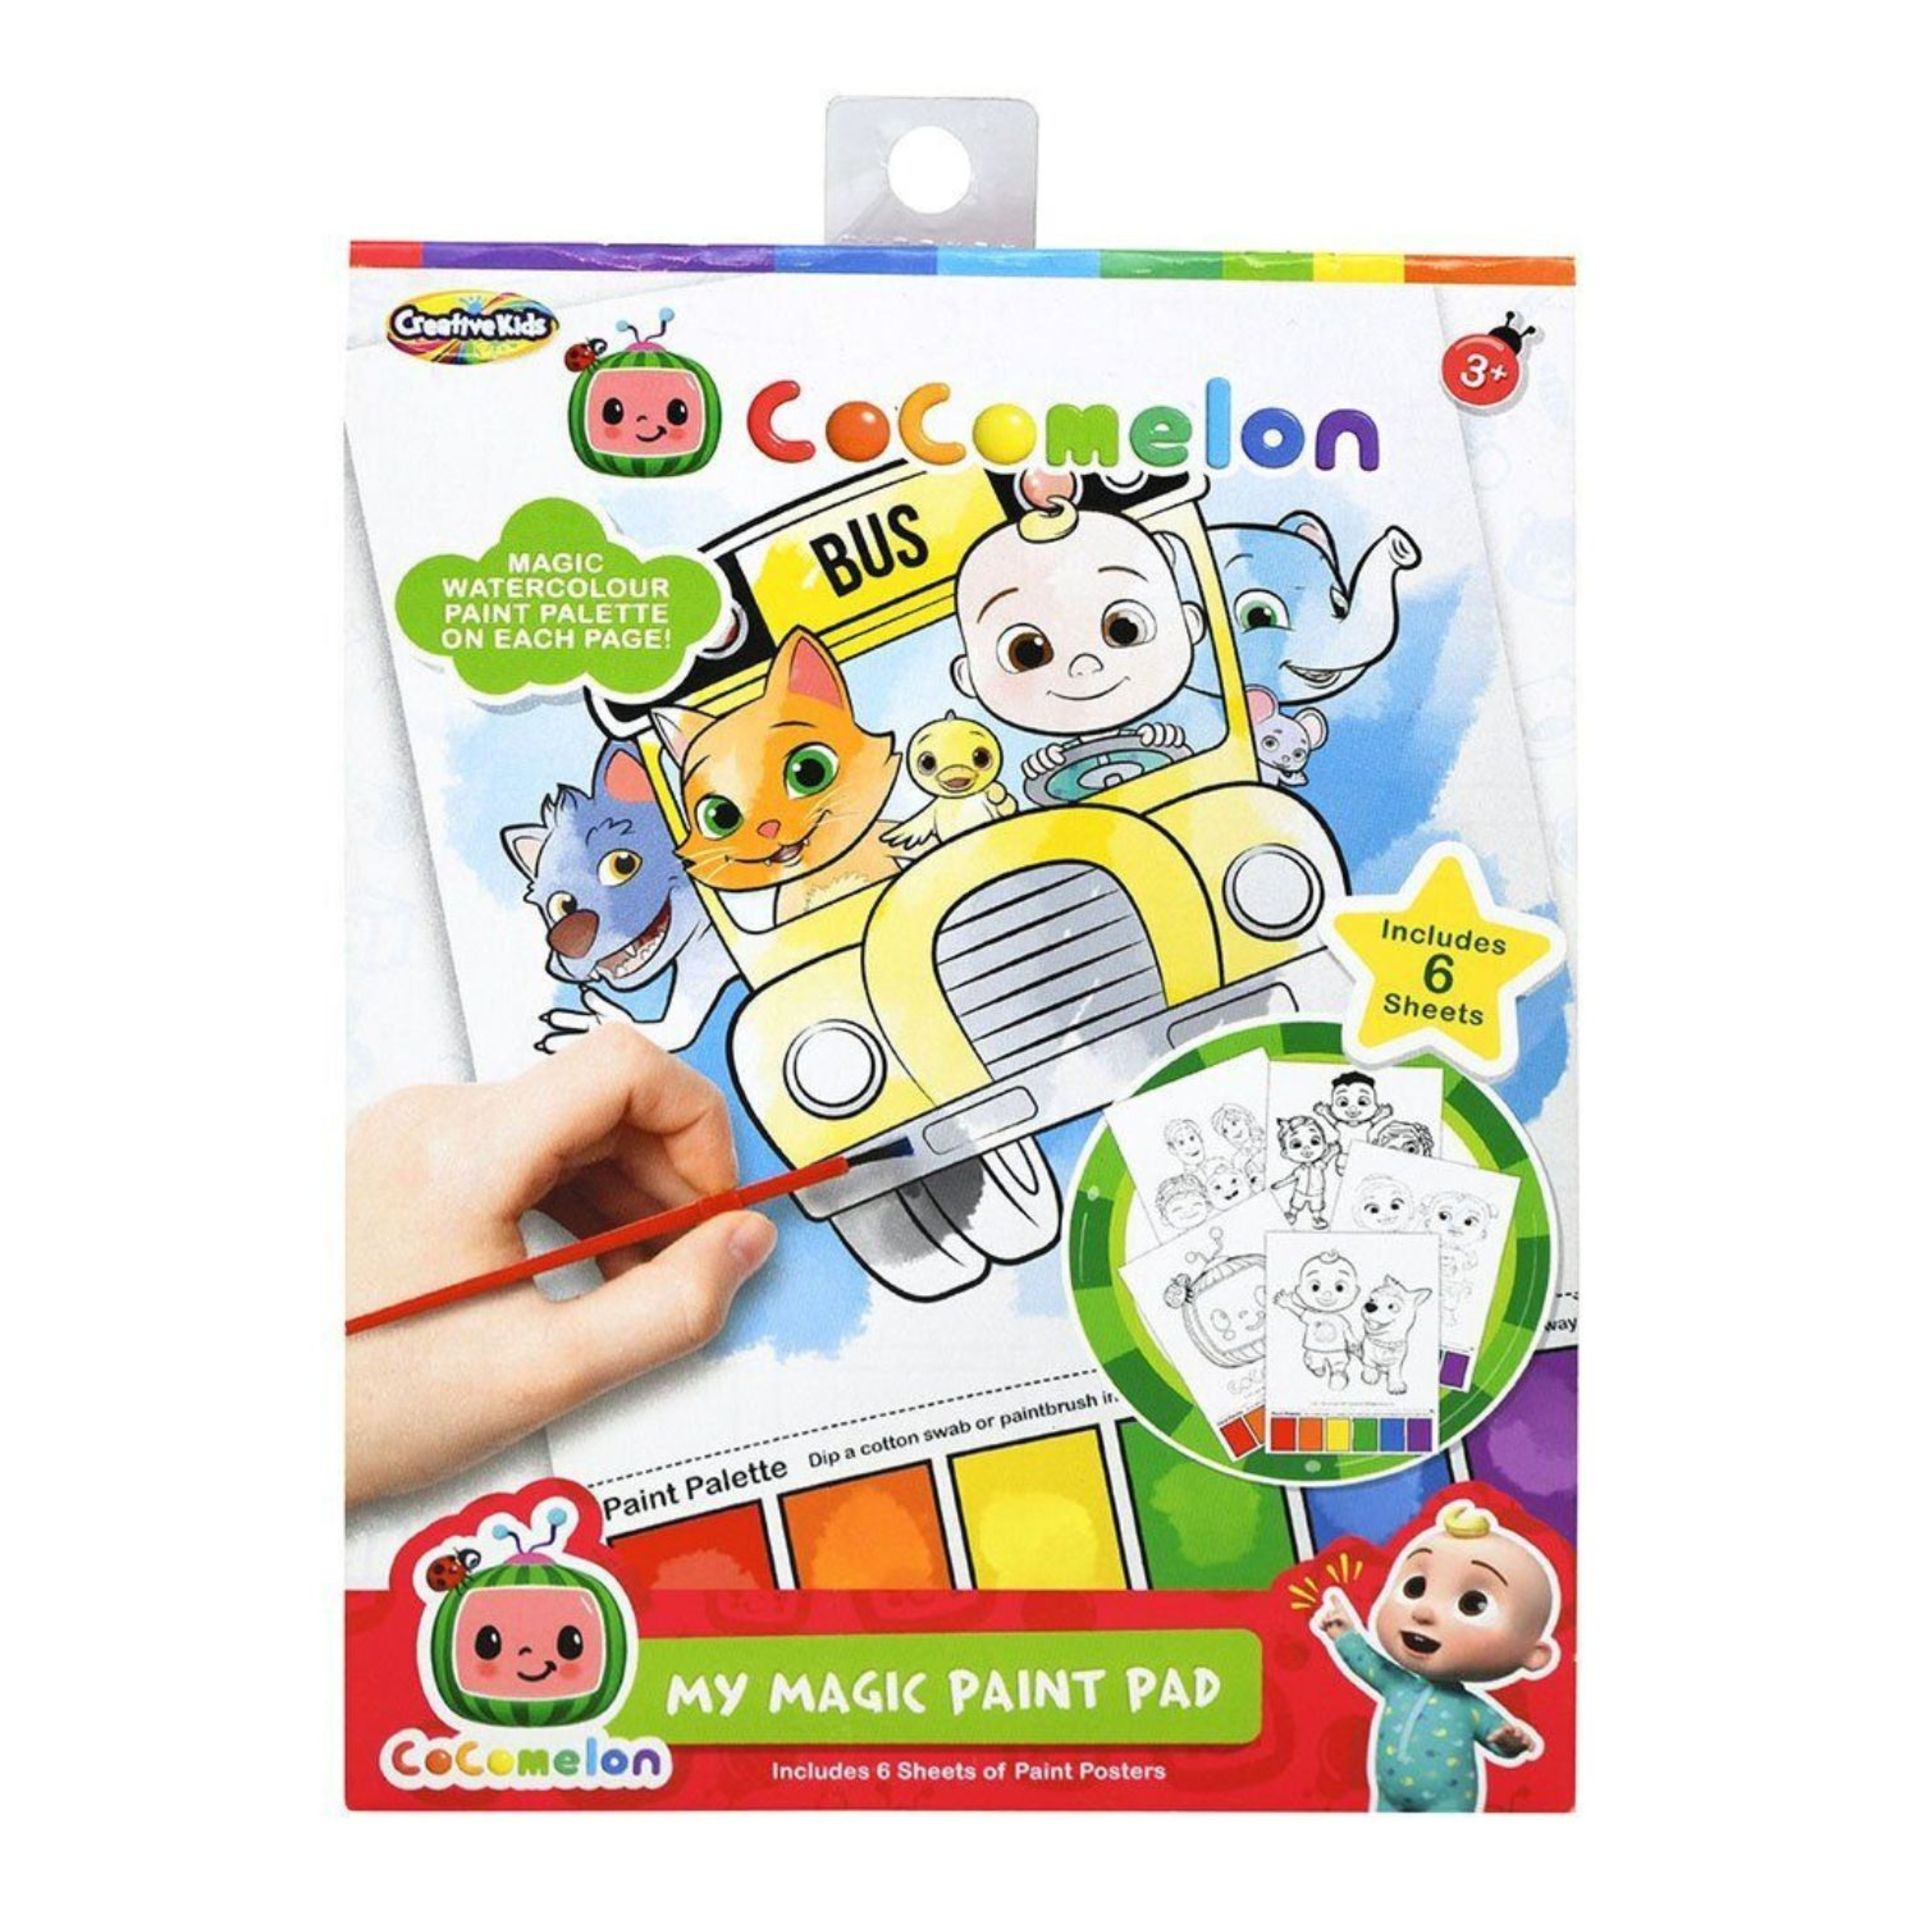 1000 PACKS OF COCOMELON ACTIVITY SETS, SANDPAPER SET AND PAINT SET - Image 3 of 3